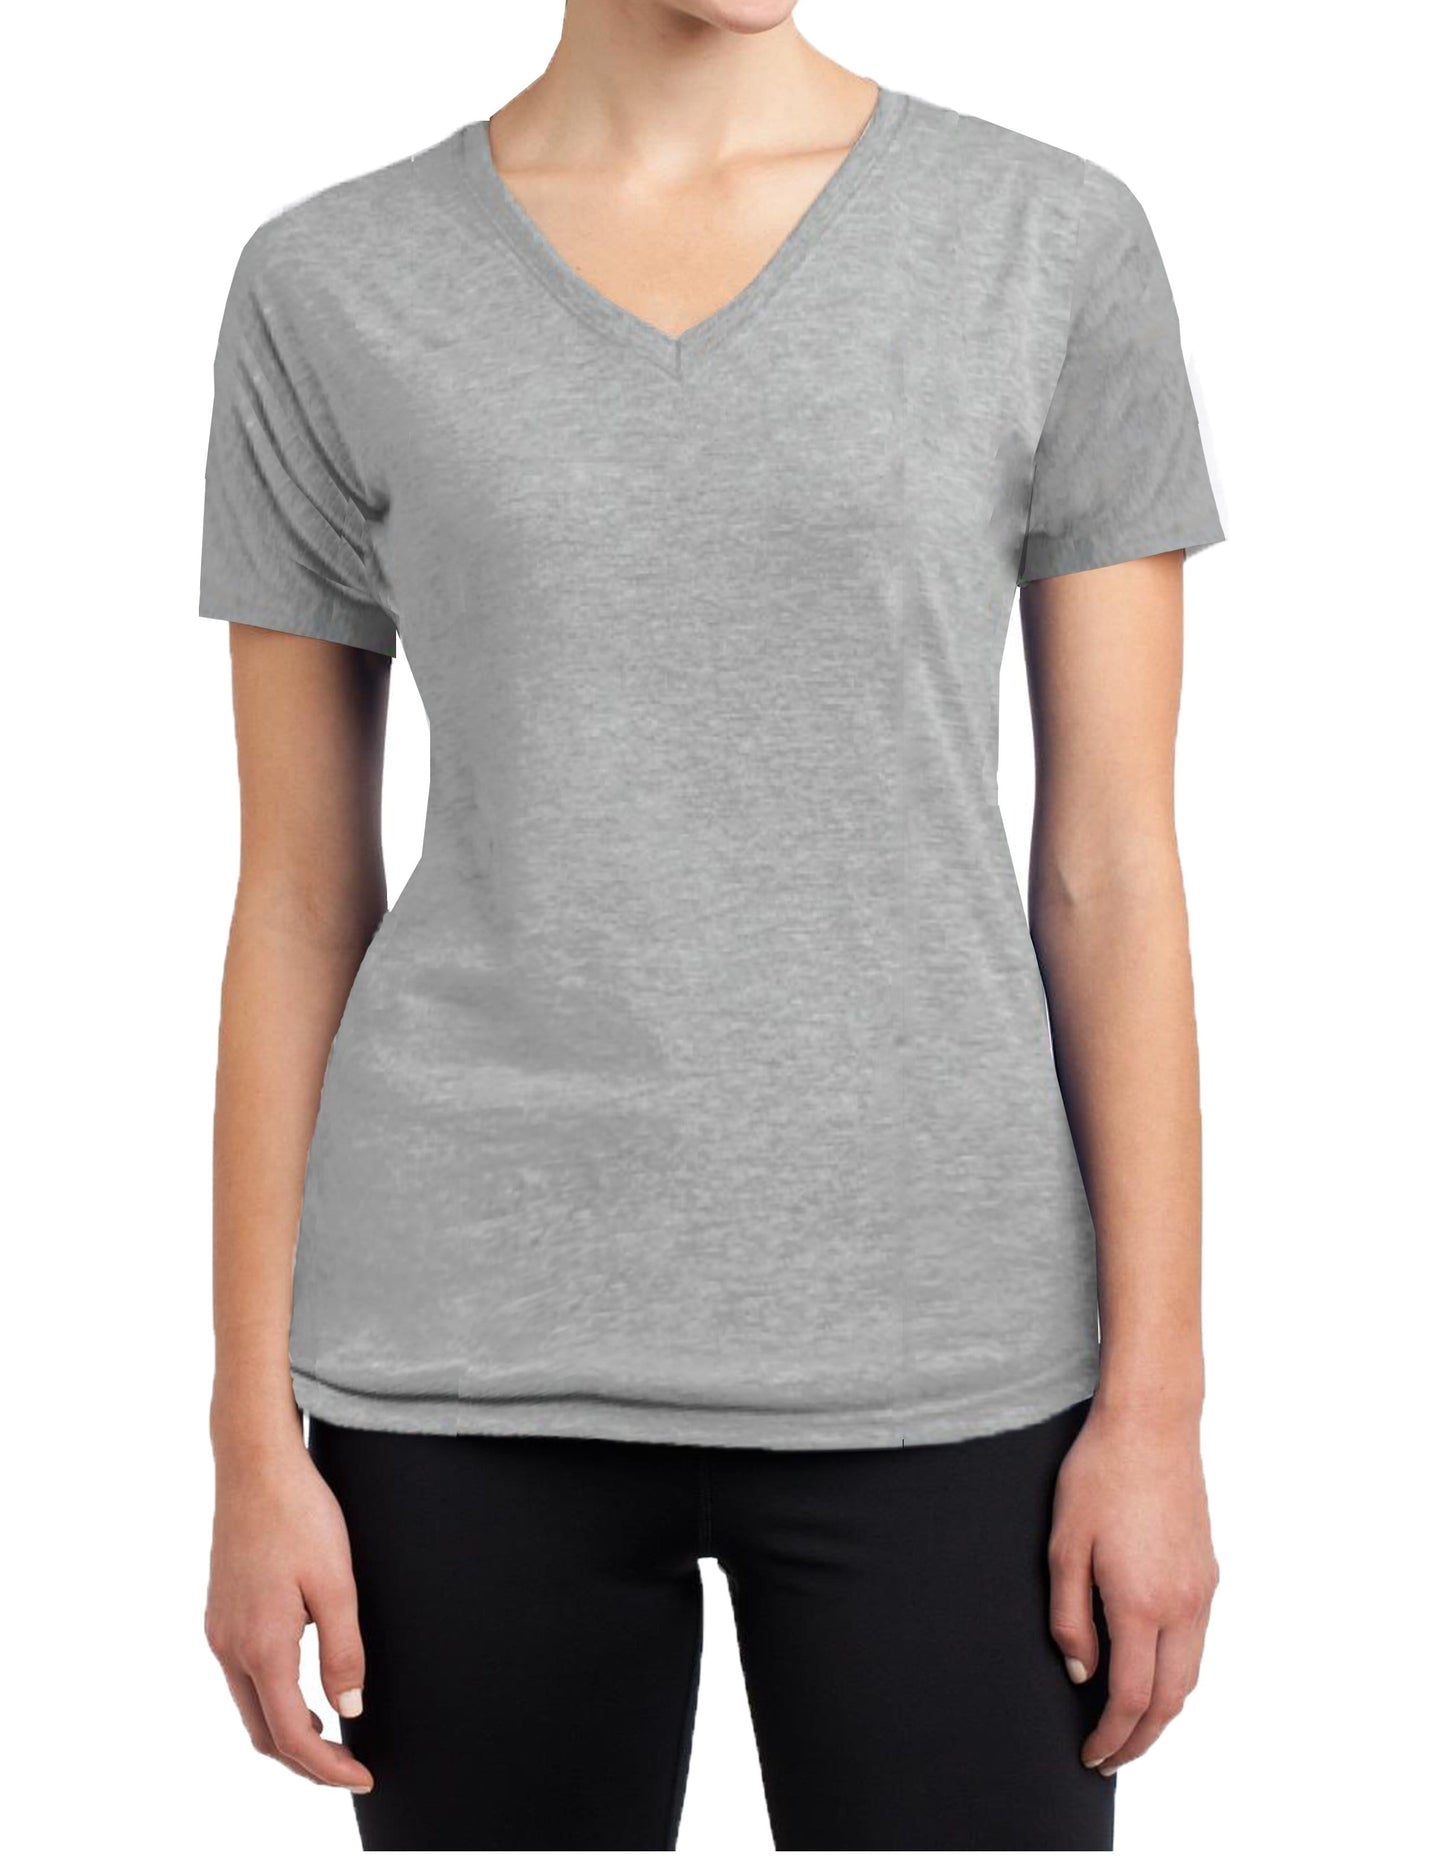 Womens Short Sleeve 97% Cotton 3% Spandex Fitted V-Neck T-Shirts - GalaxybyHarvic